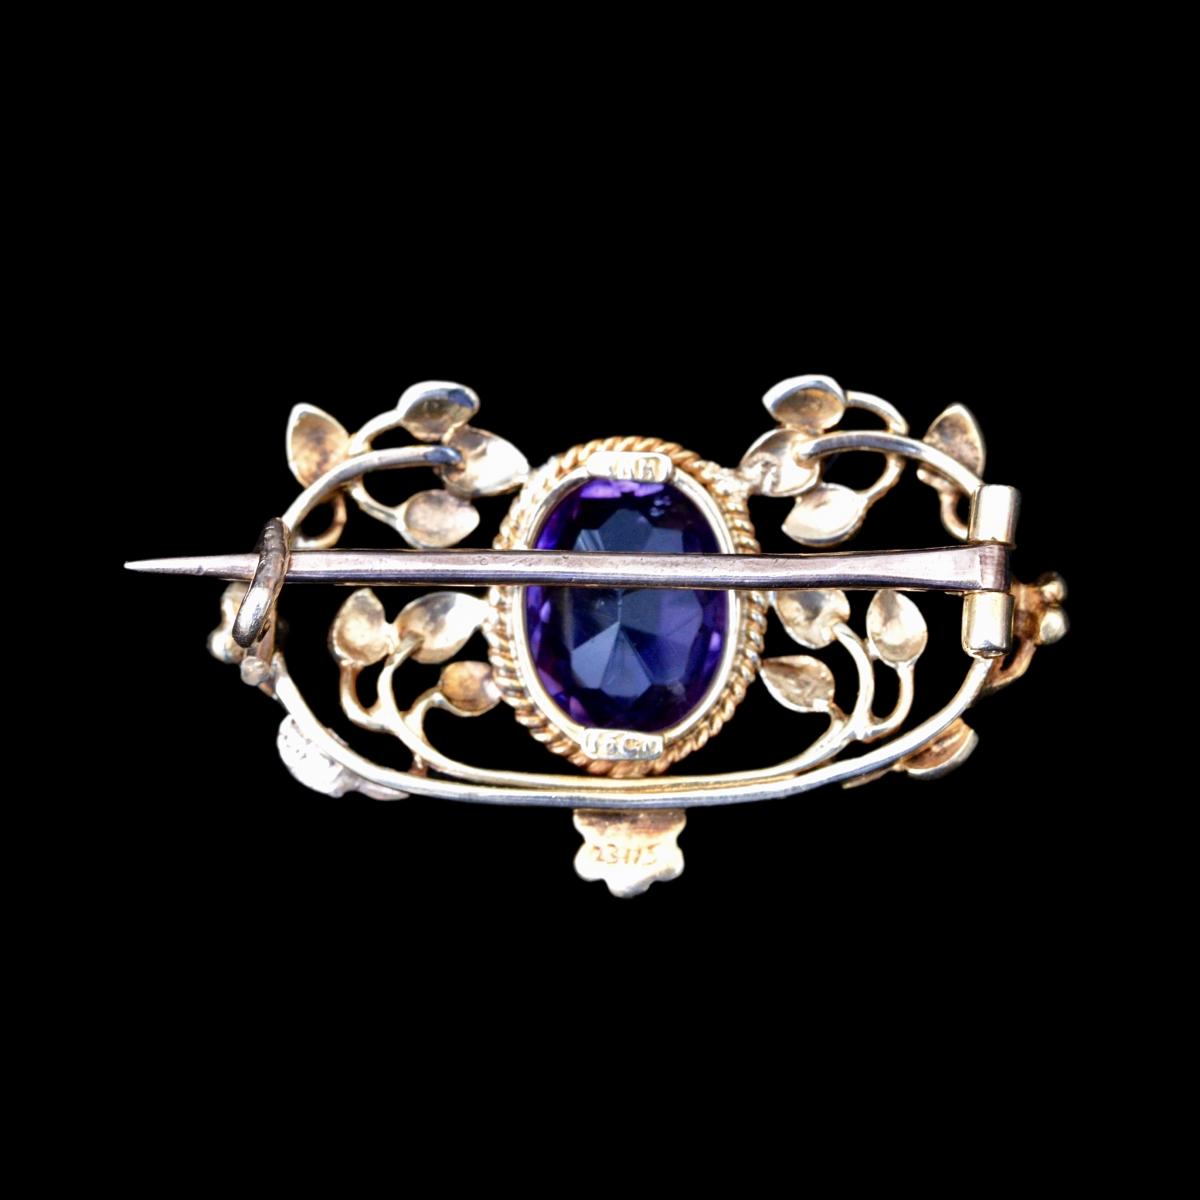 Jessie King gold and amethyst art nouveau small brooch reverse